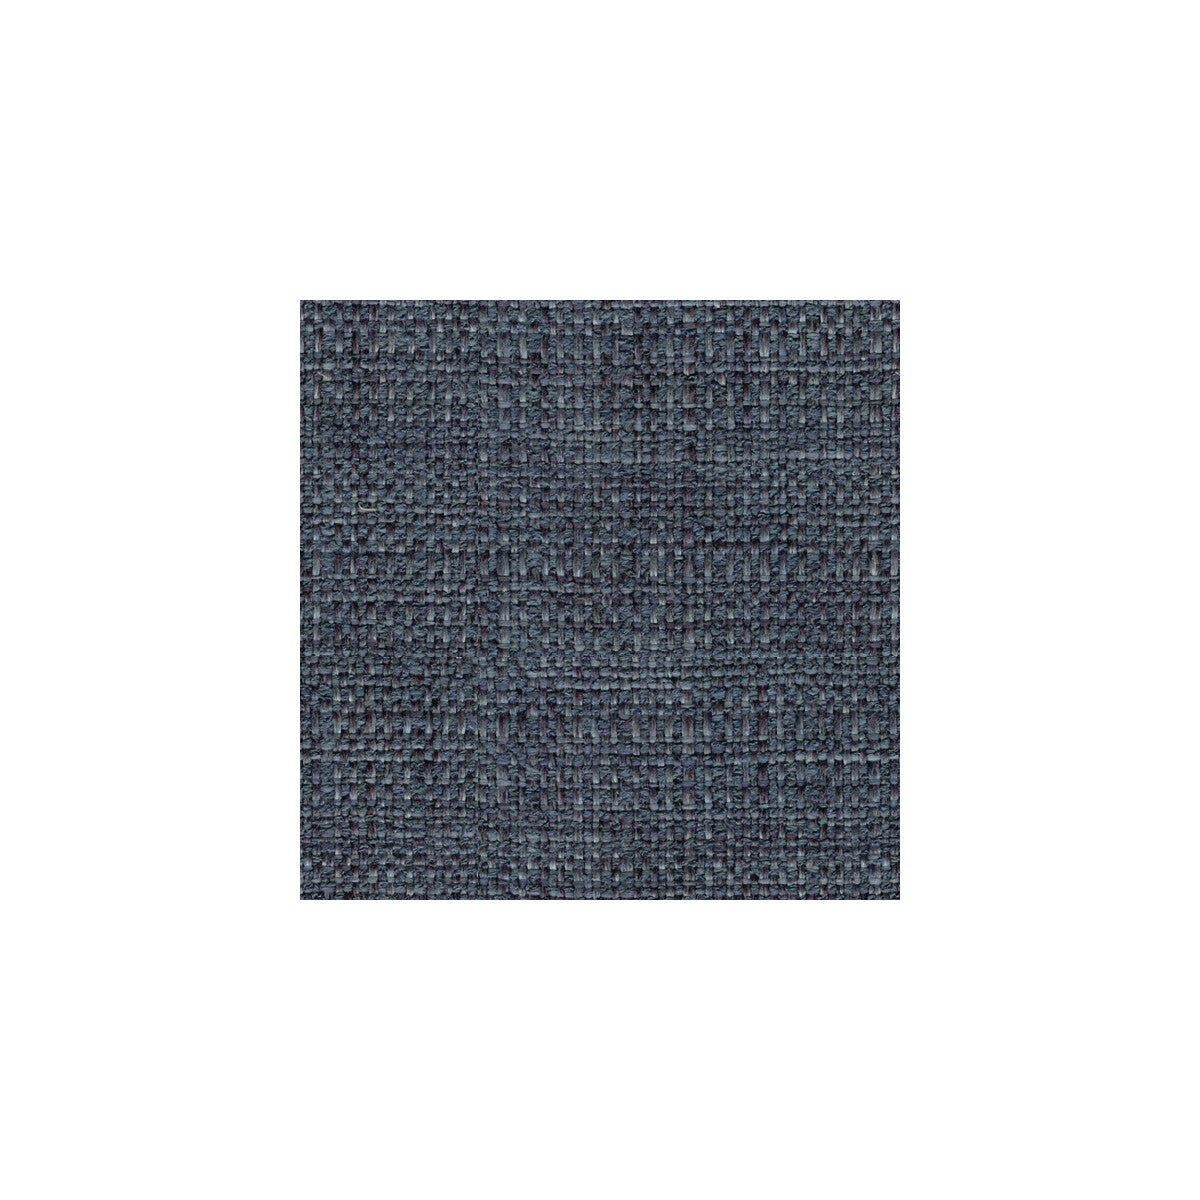 Kravet Contract fabric in 32020-5 color - pattern 32020.5.0 - by Kravet Contract